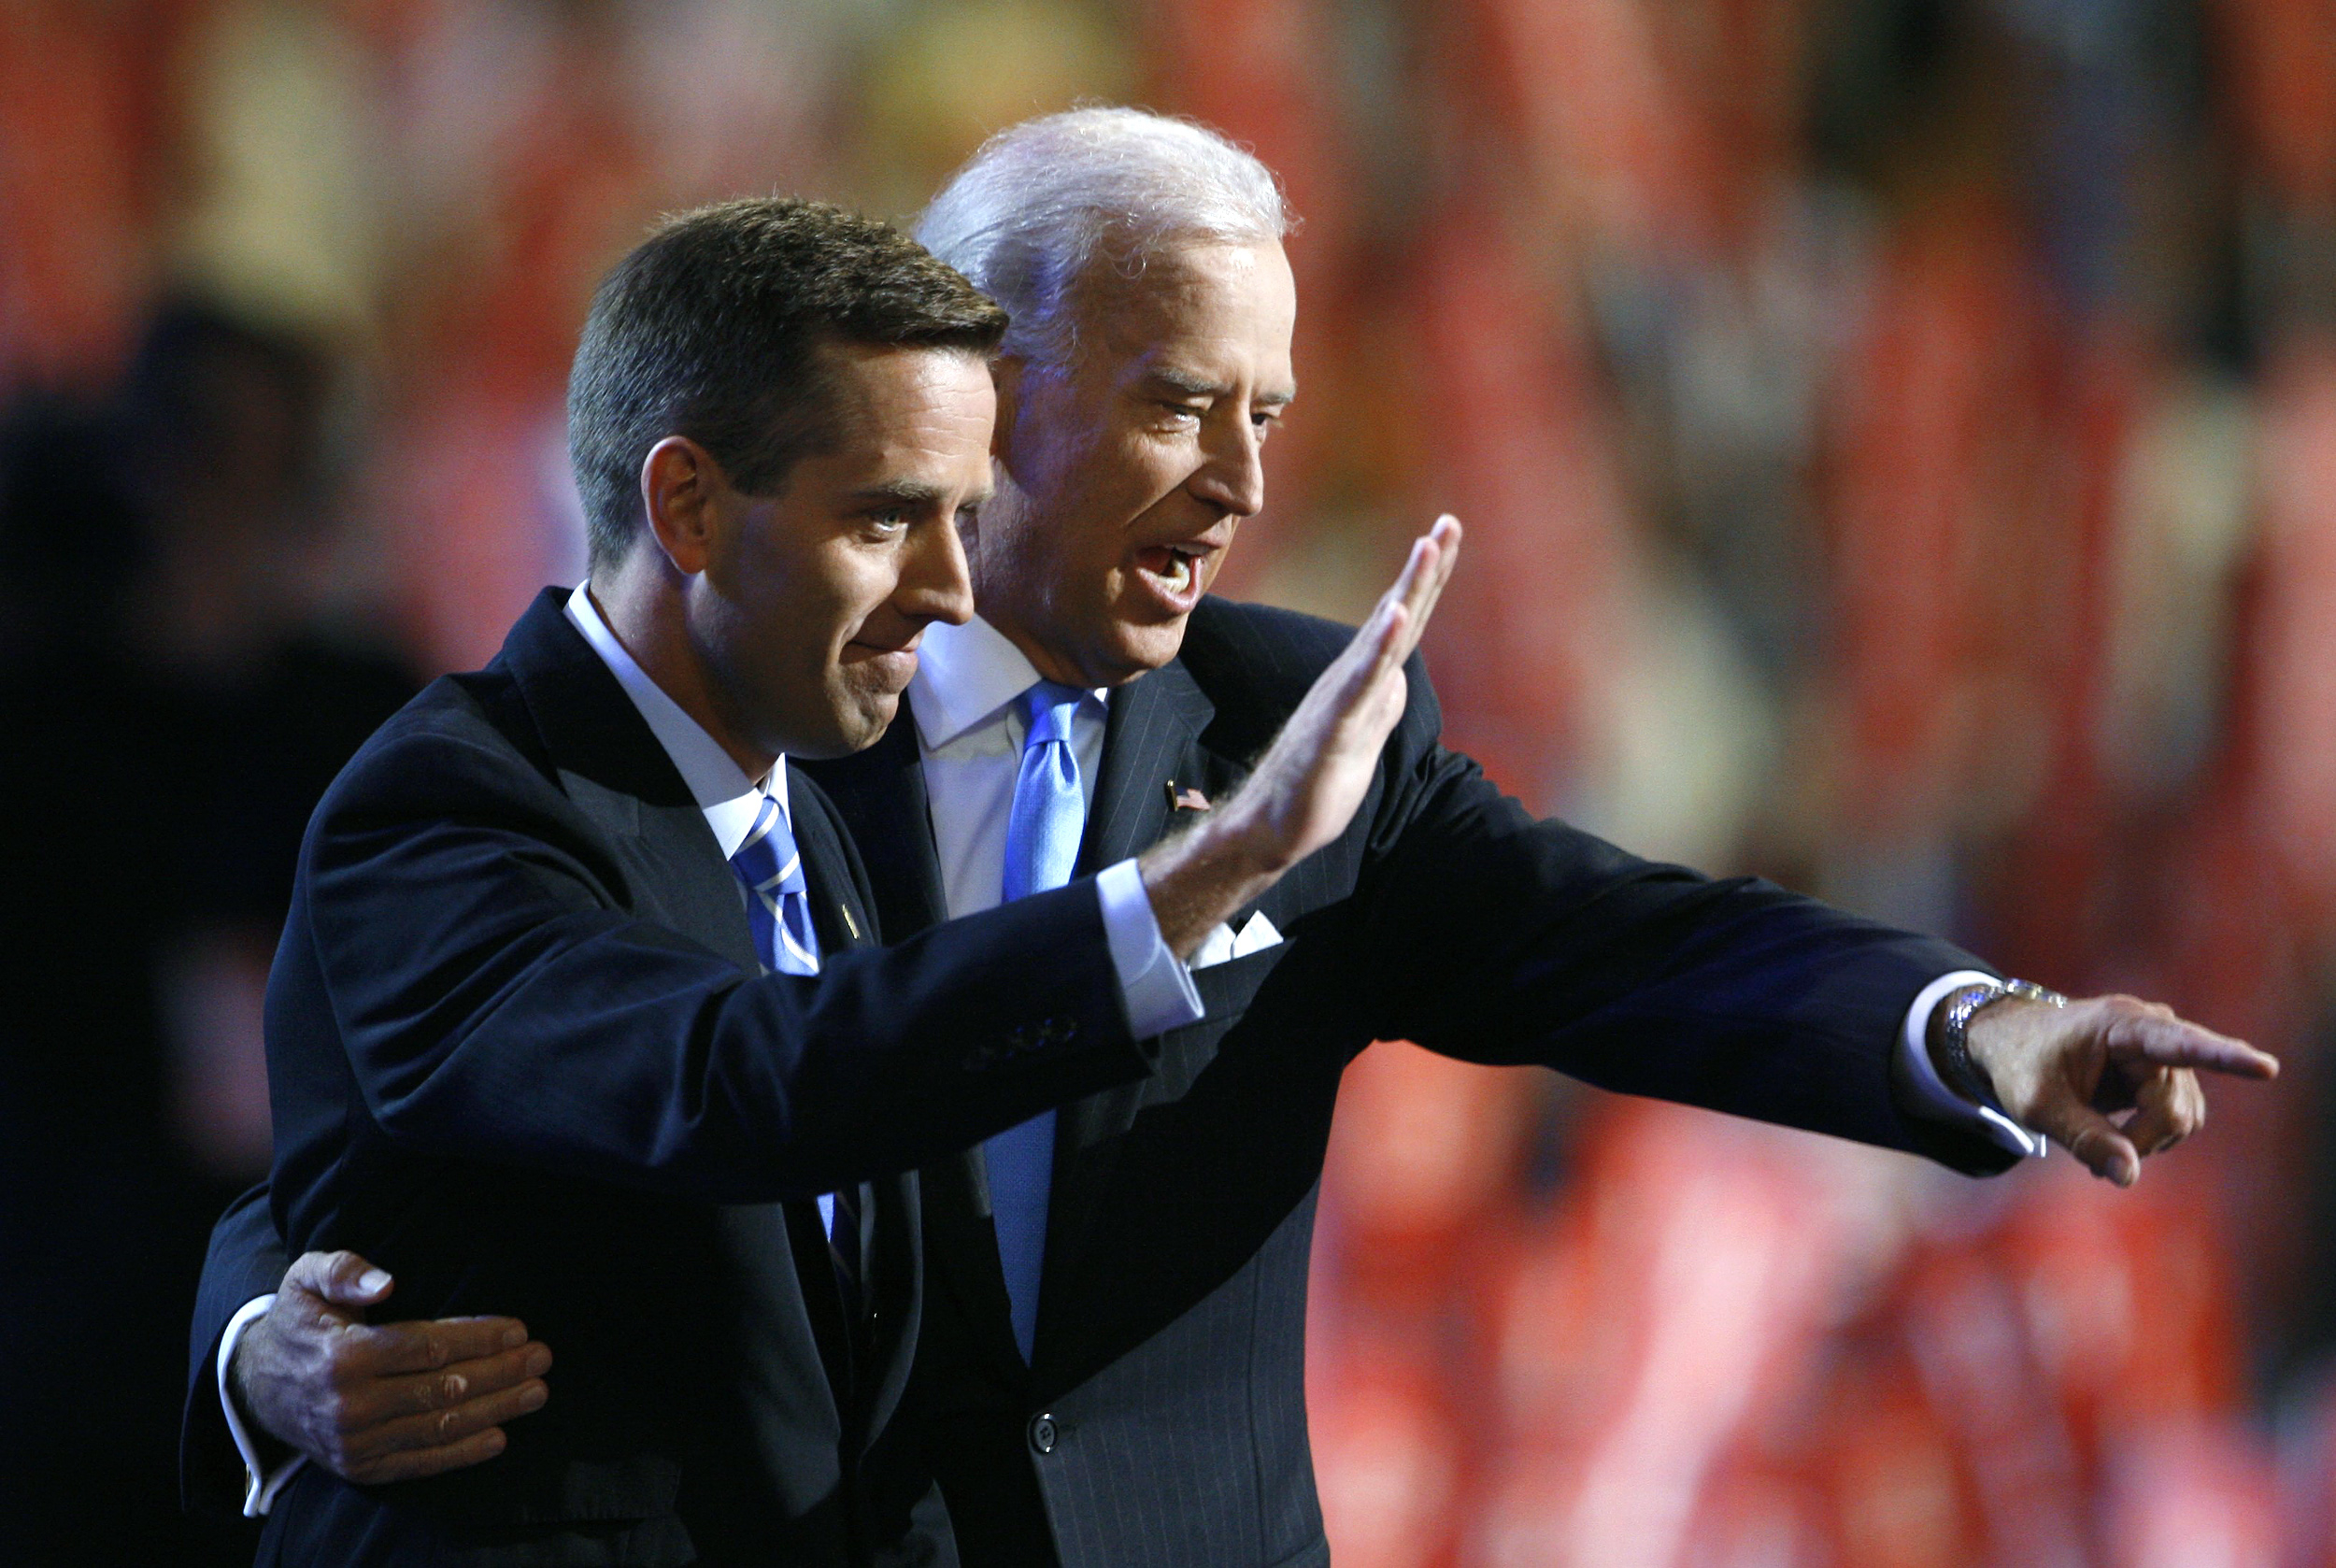 Vice Presidential candidate Joe Biden and his son Beau Biden on stage together at the 2008 Democratic National Convention in Denver